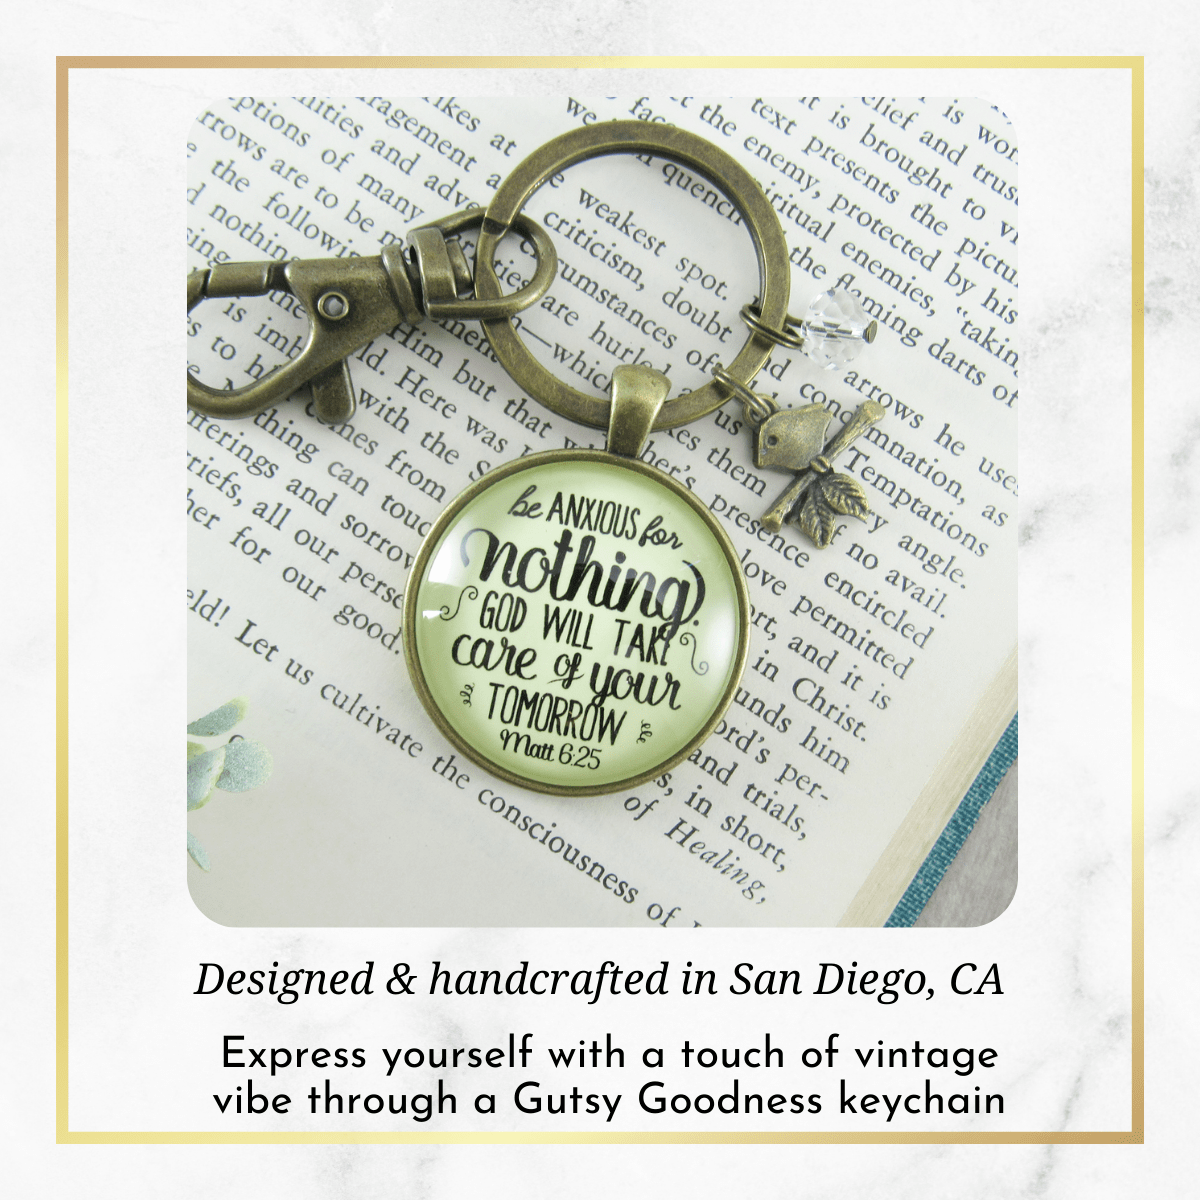 Be Anxious for Nothing Keychain Believer Reminder Message Jewelry Brid Charm - Gutsy Goodness Handmade Jewelry;Be Anxious For Nothing Keychain Believer Reminder Message Jewelry Brid Charm - Gutsy Goodness Handmade Jewelry Gifts